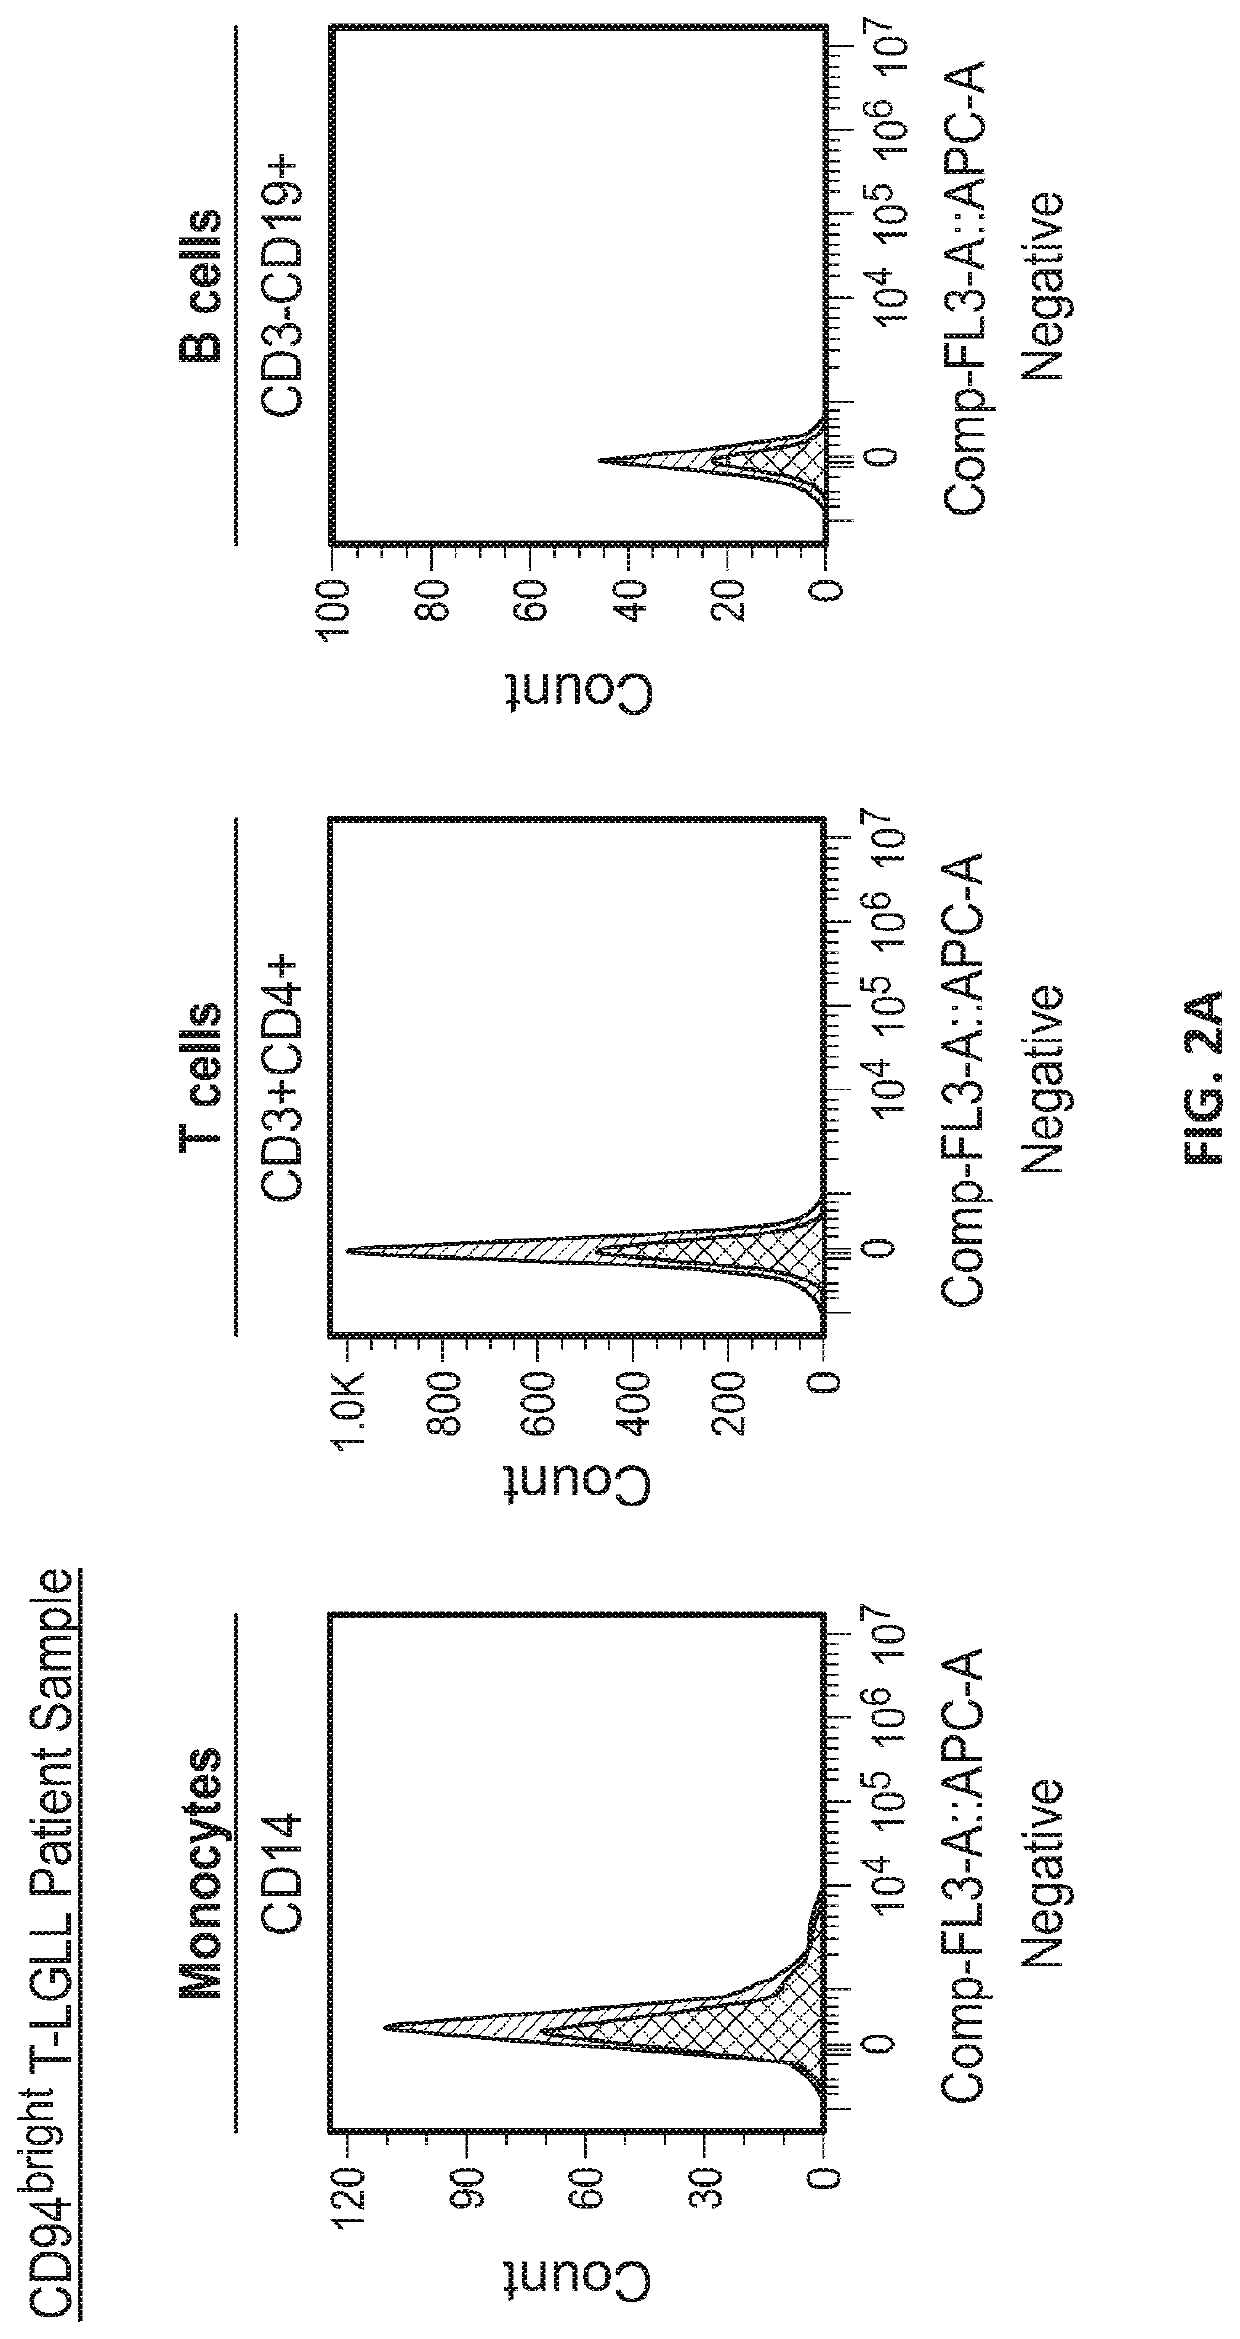 Methods of reducing large granular lymphocyte and natural killer cell levels